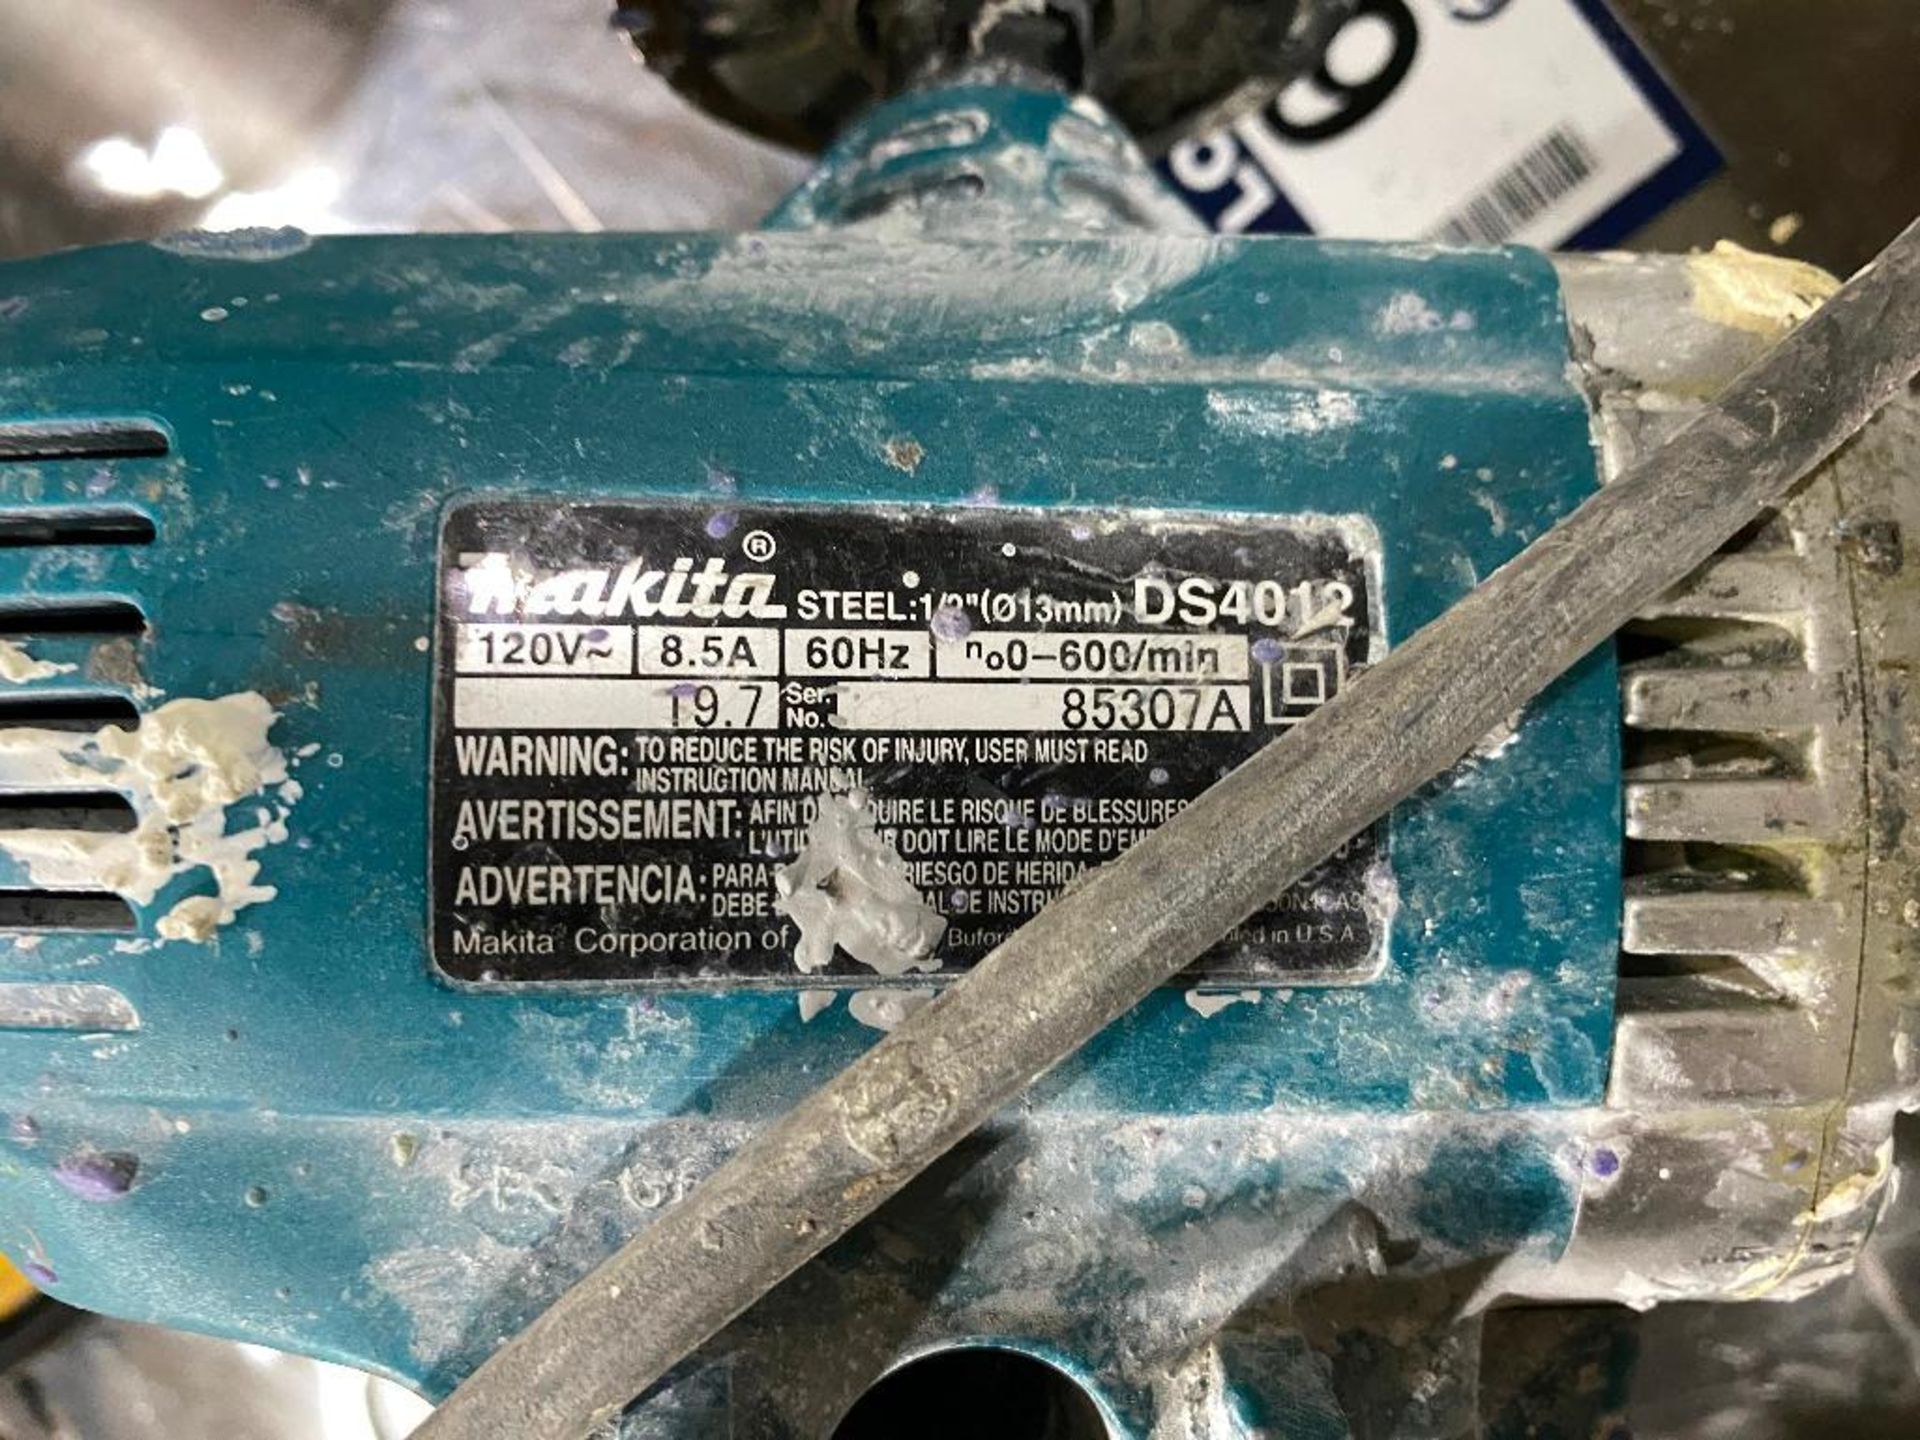 Makita DS4012 1/2" Drill - Image 3 of 3